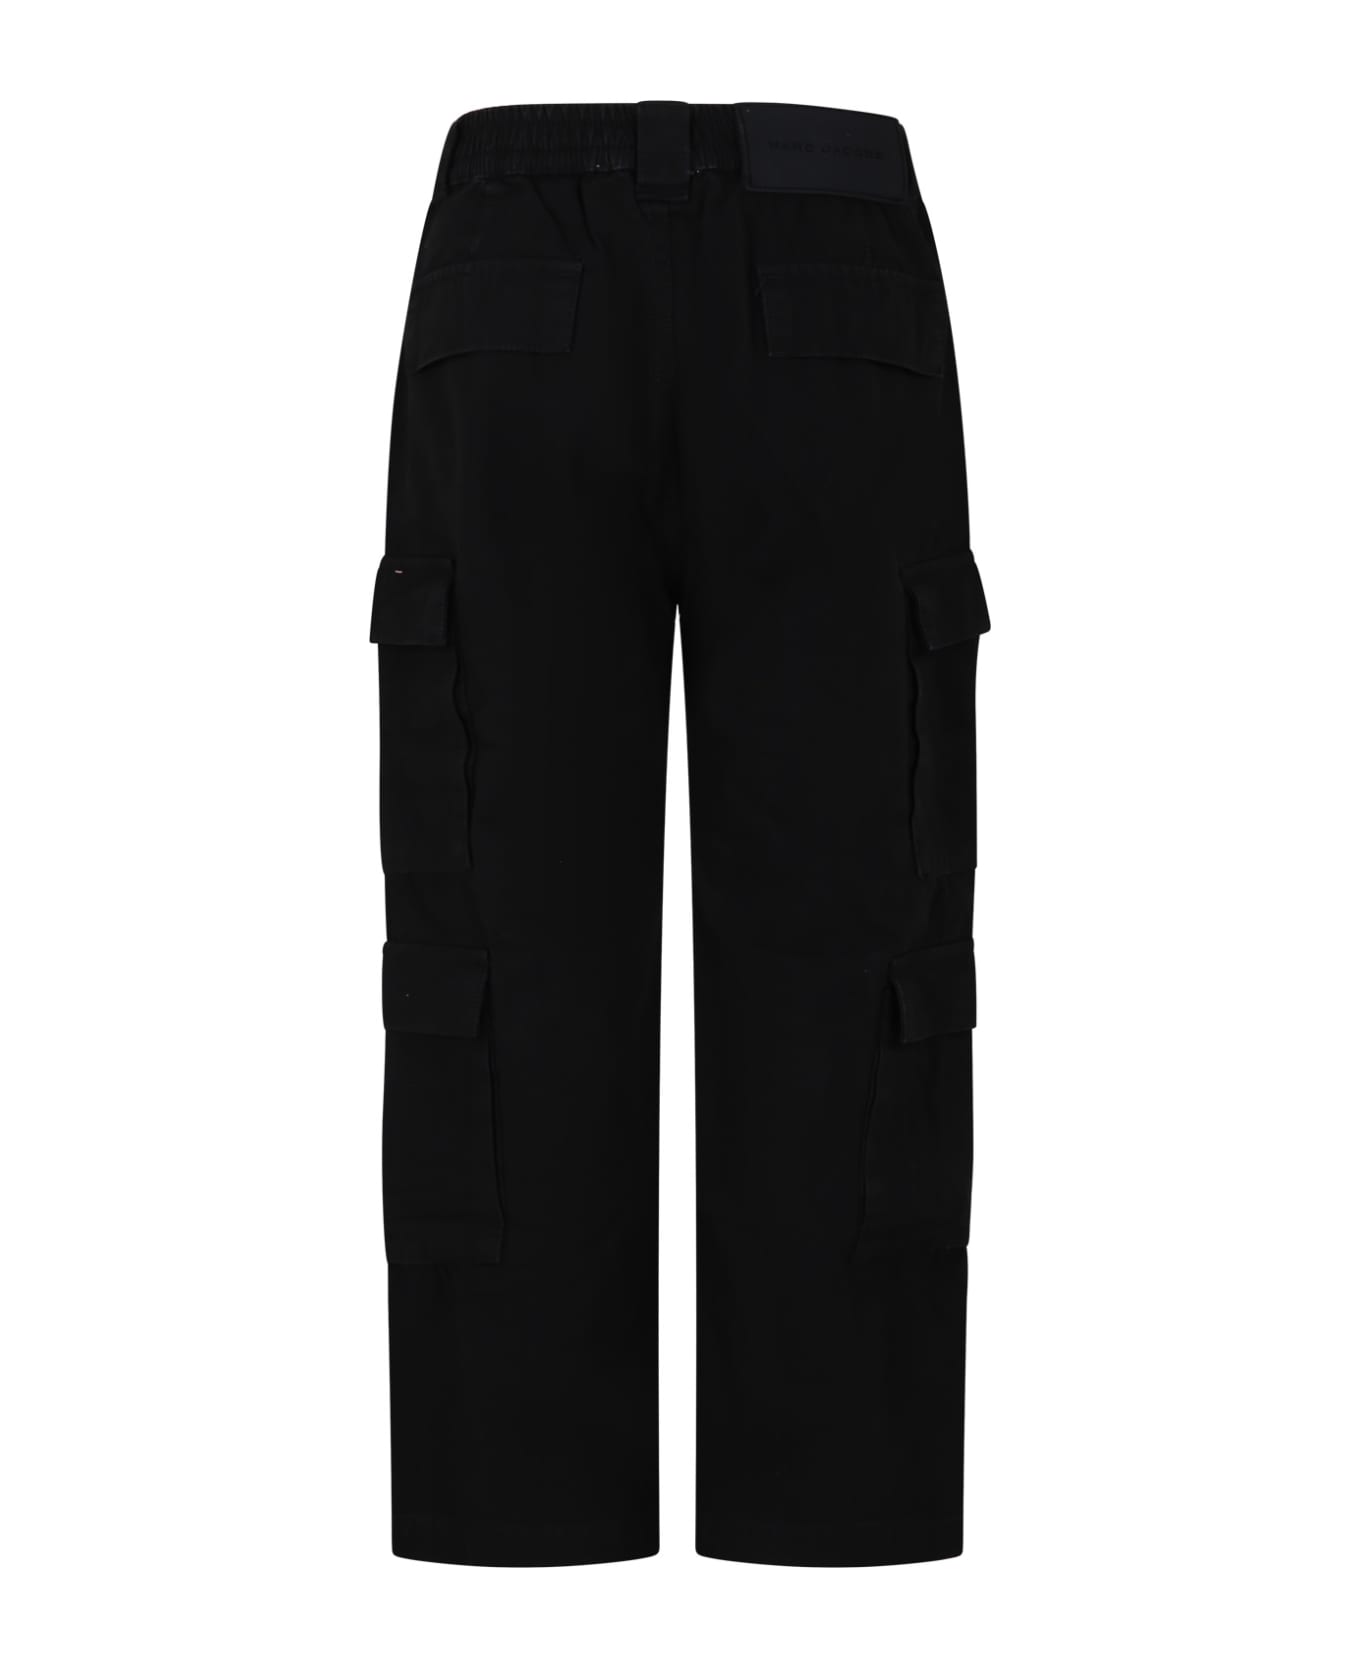 Marc Jacobs Black Cargo Pants For Kids - Black ボトムス